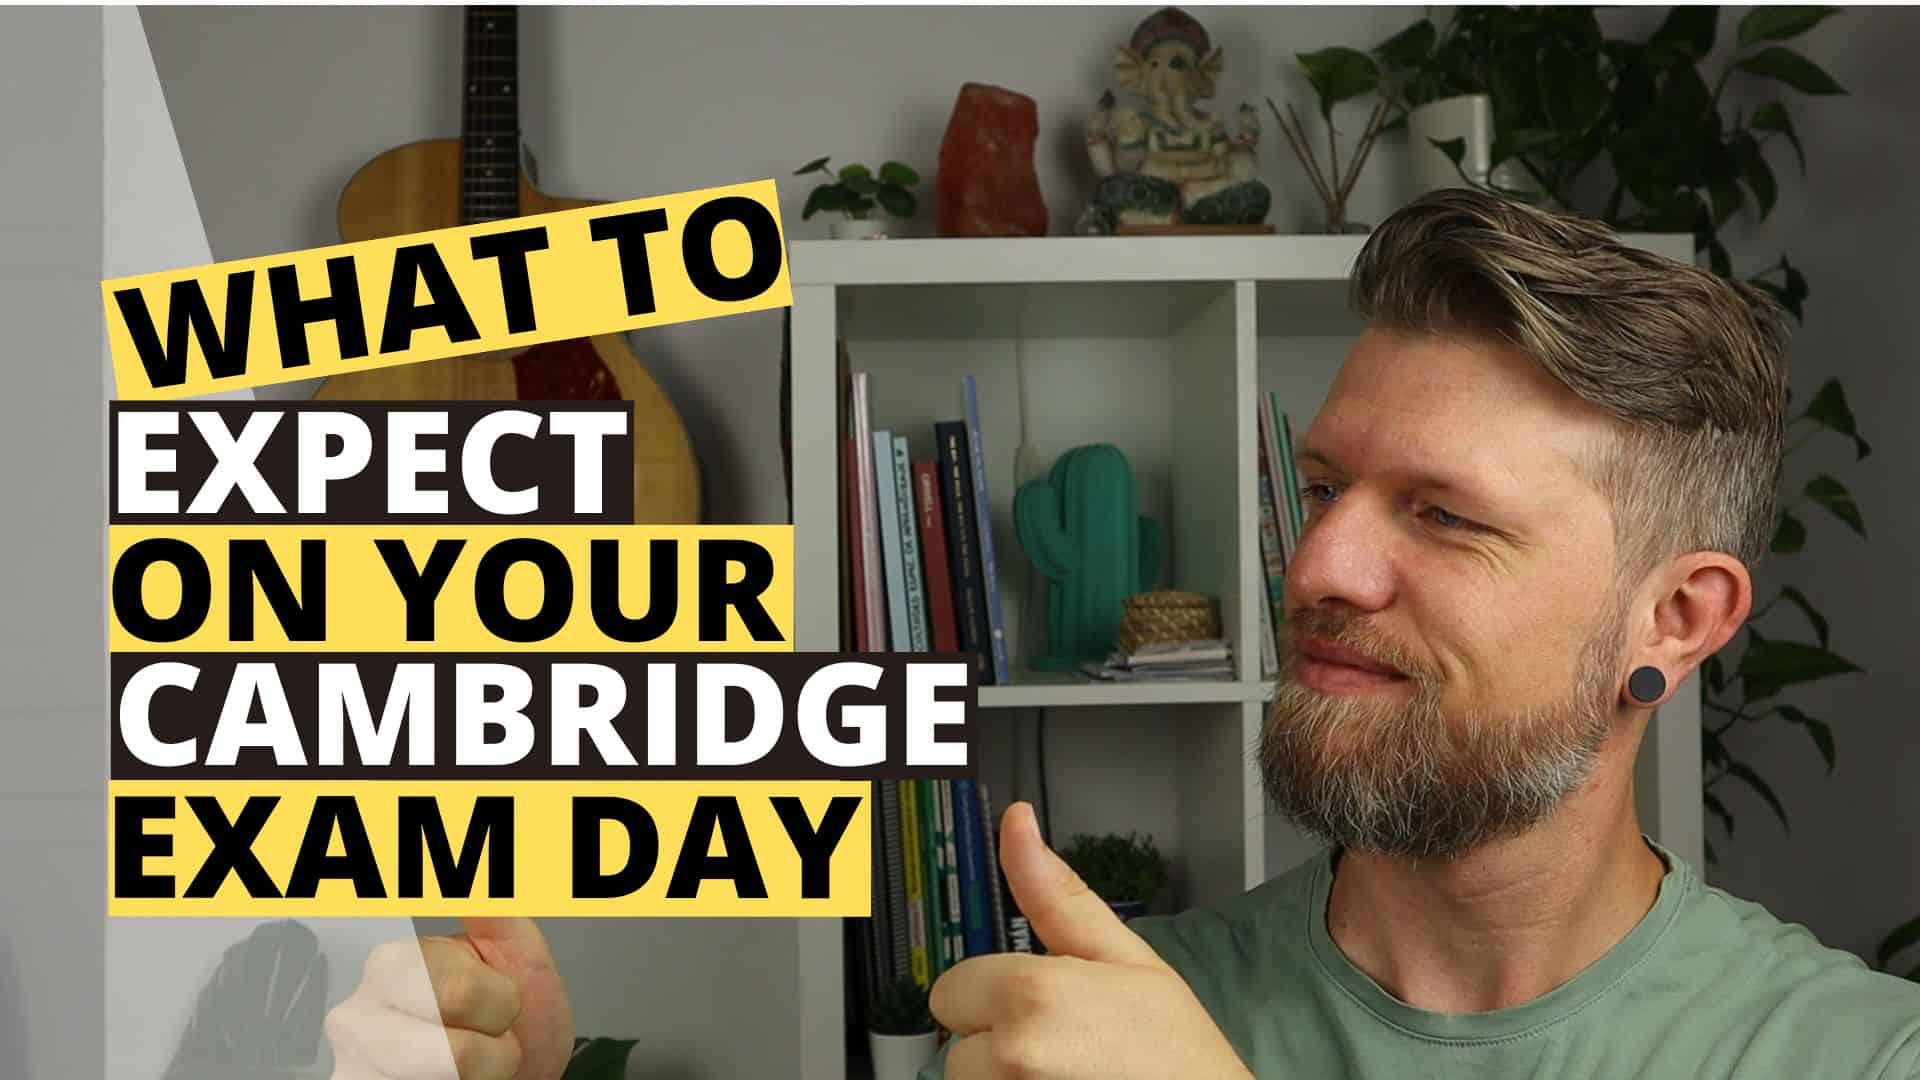 How To Stay Calm on Your Cambridge Exam Day - Teacher Phill